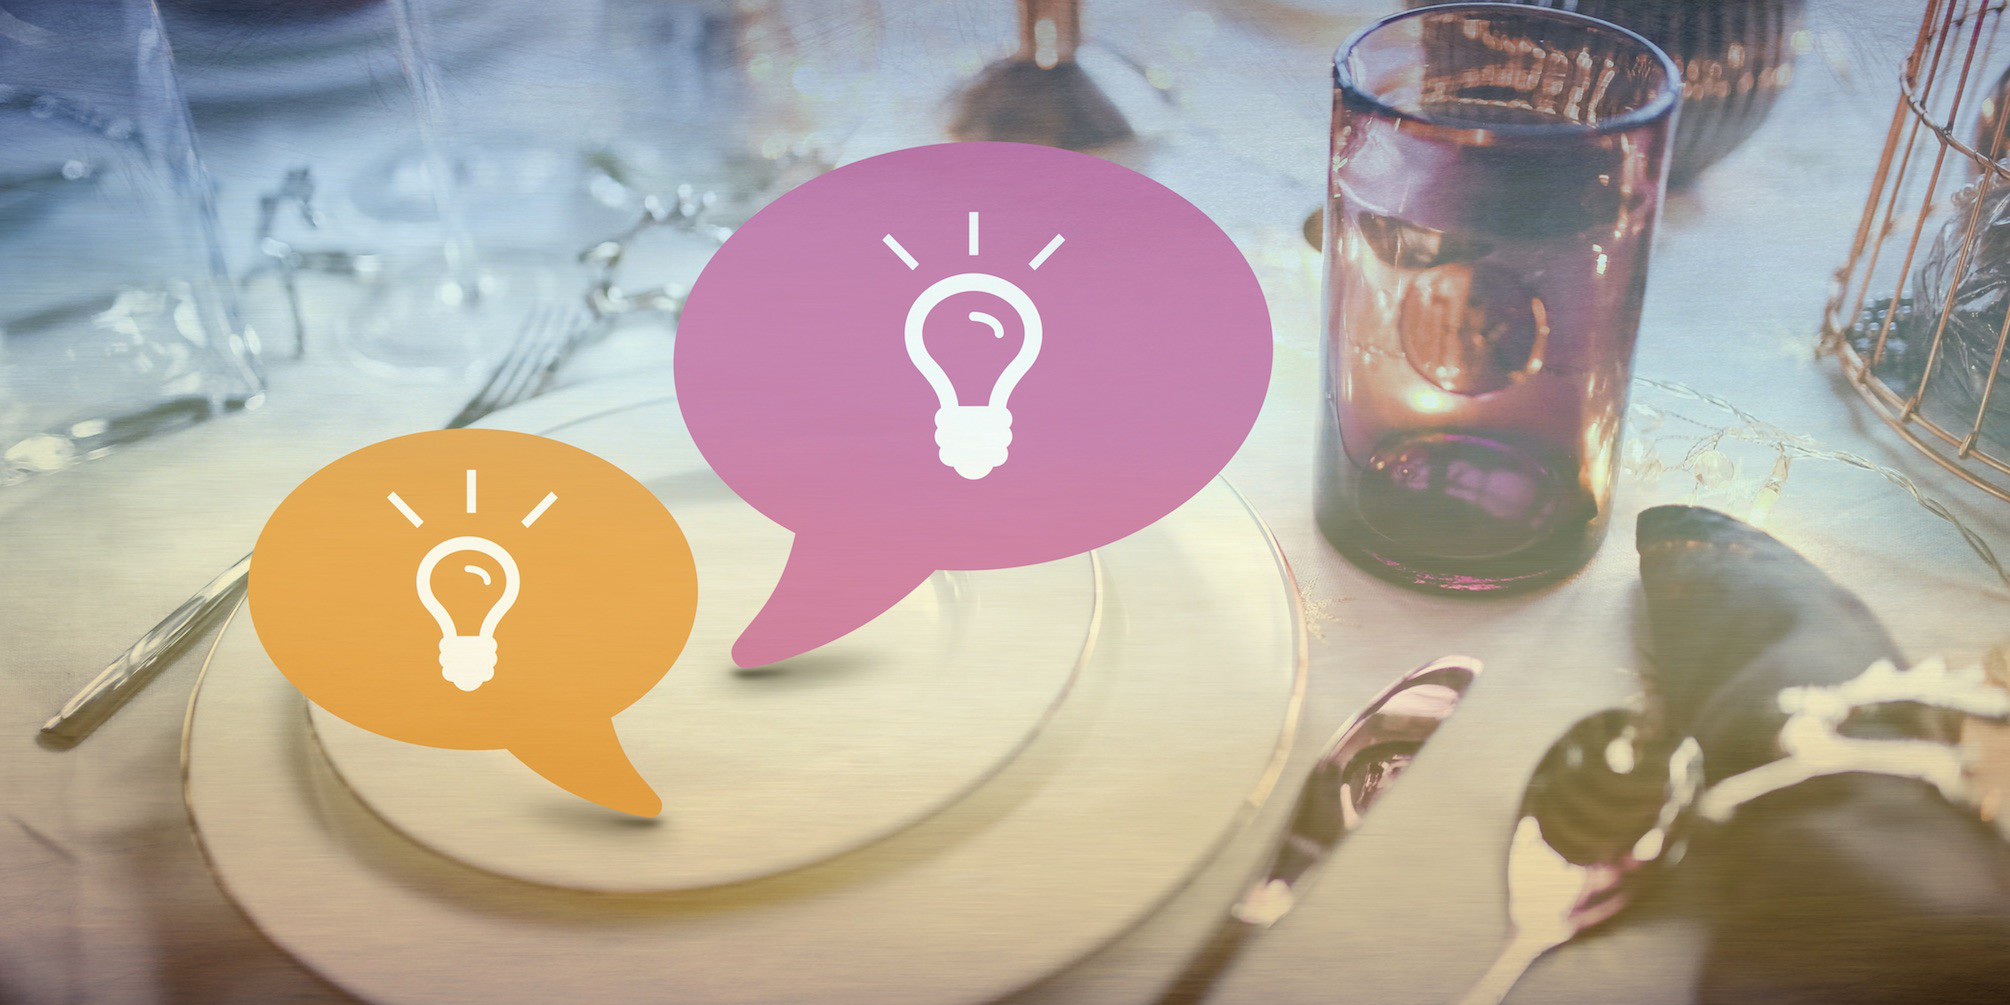 Two conversation bubbles on a place setting with light bulb icons in them